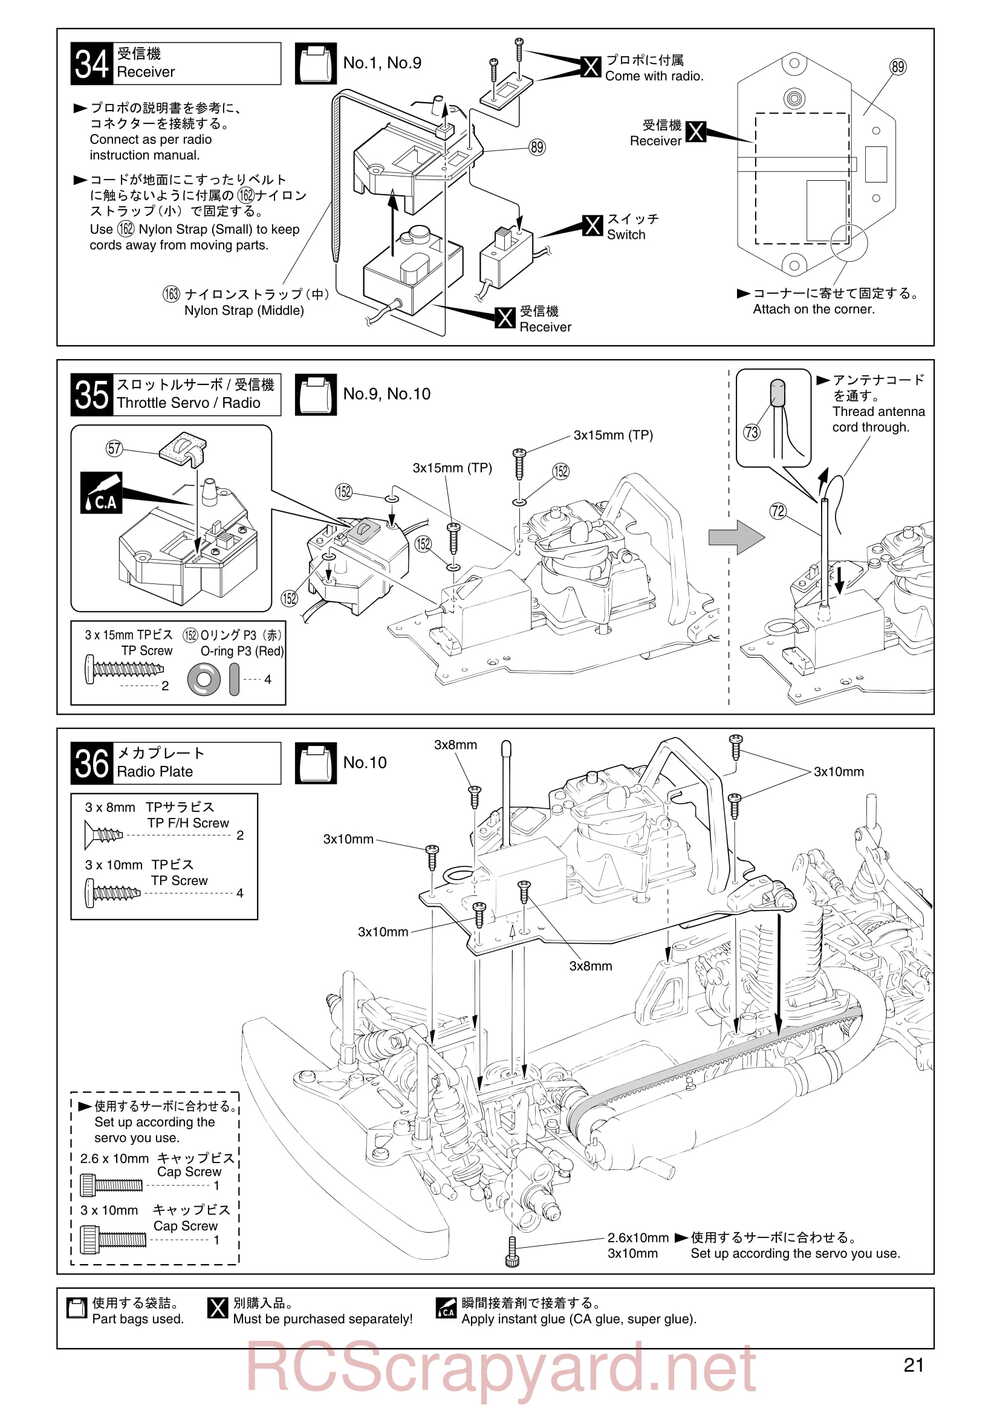 Kyosho - 31011 - V-One R - Manual - Page 21